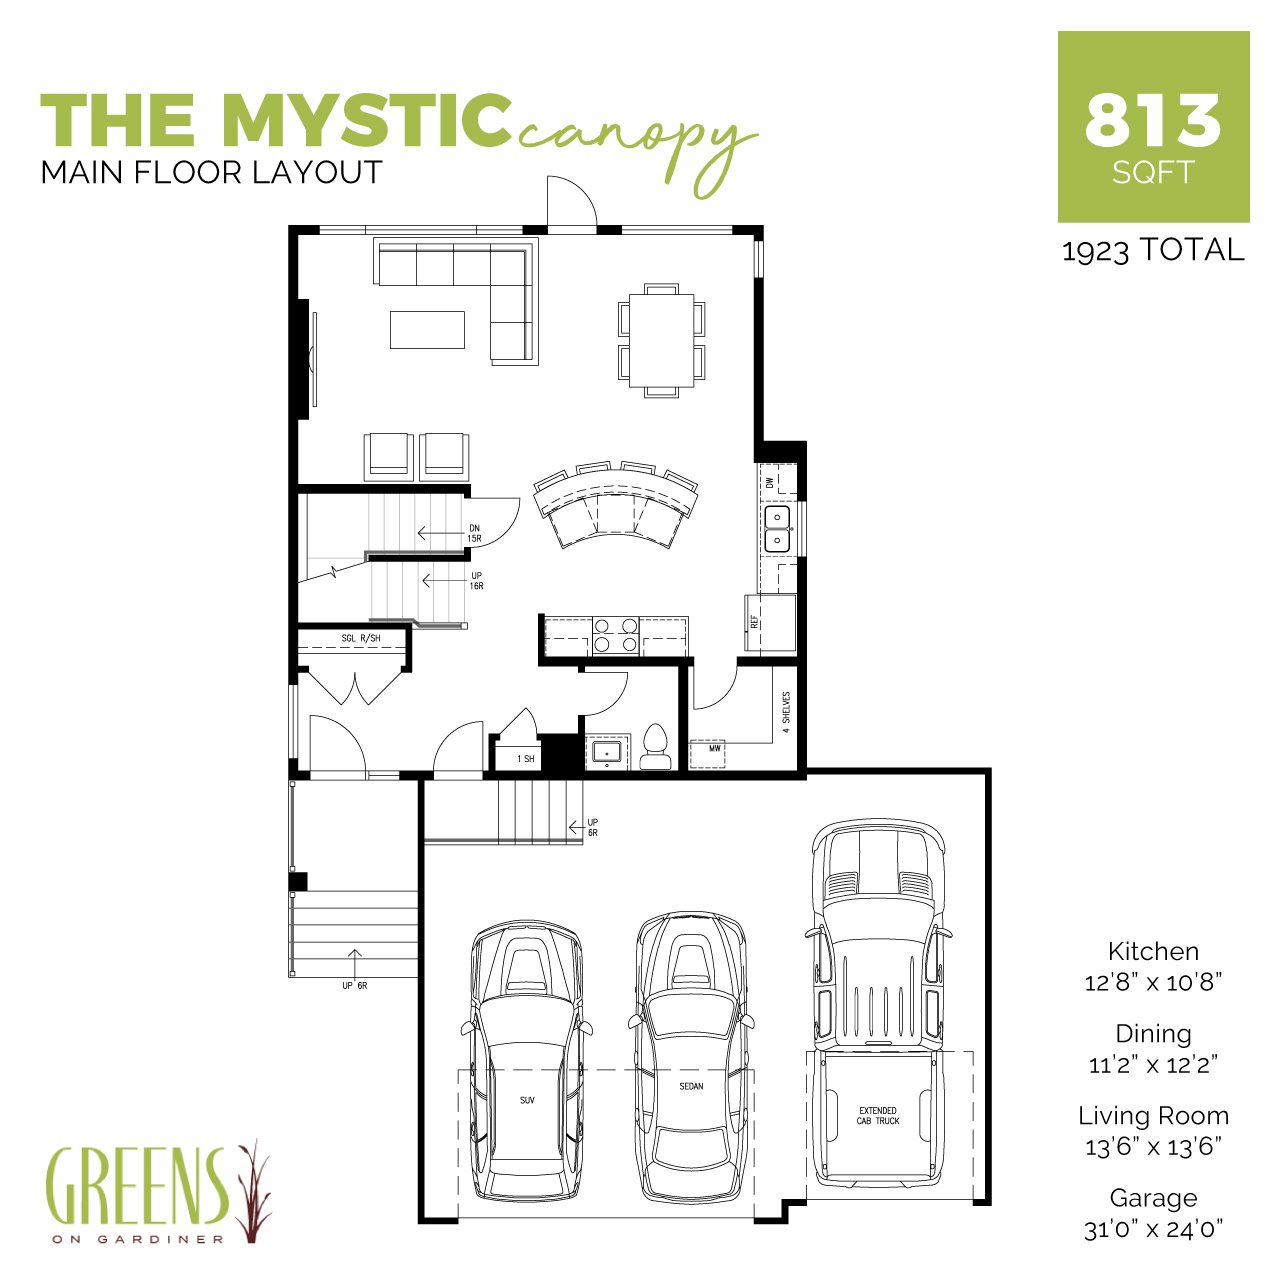 A main floor layout showing an open concept floor plan with kitchen, dining and living with a powder room and triple-car garage.